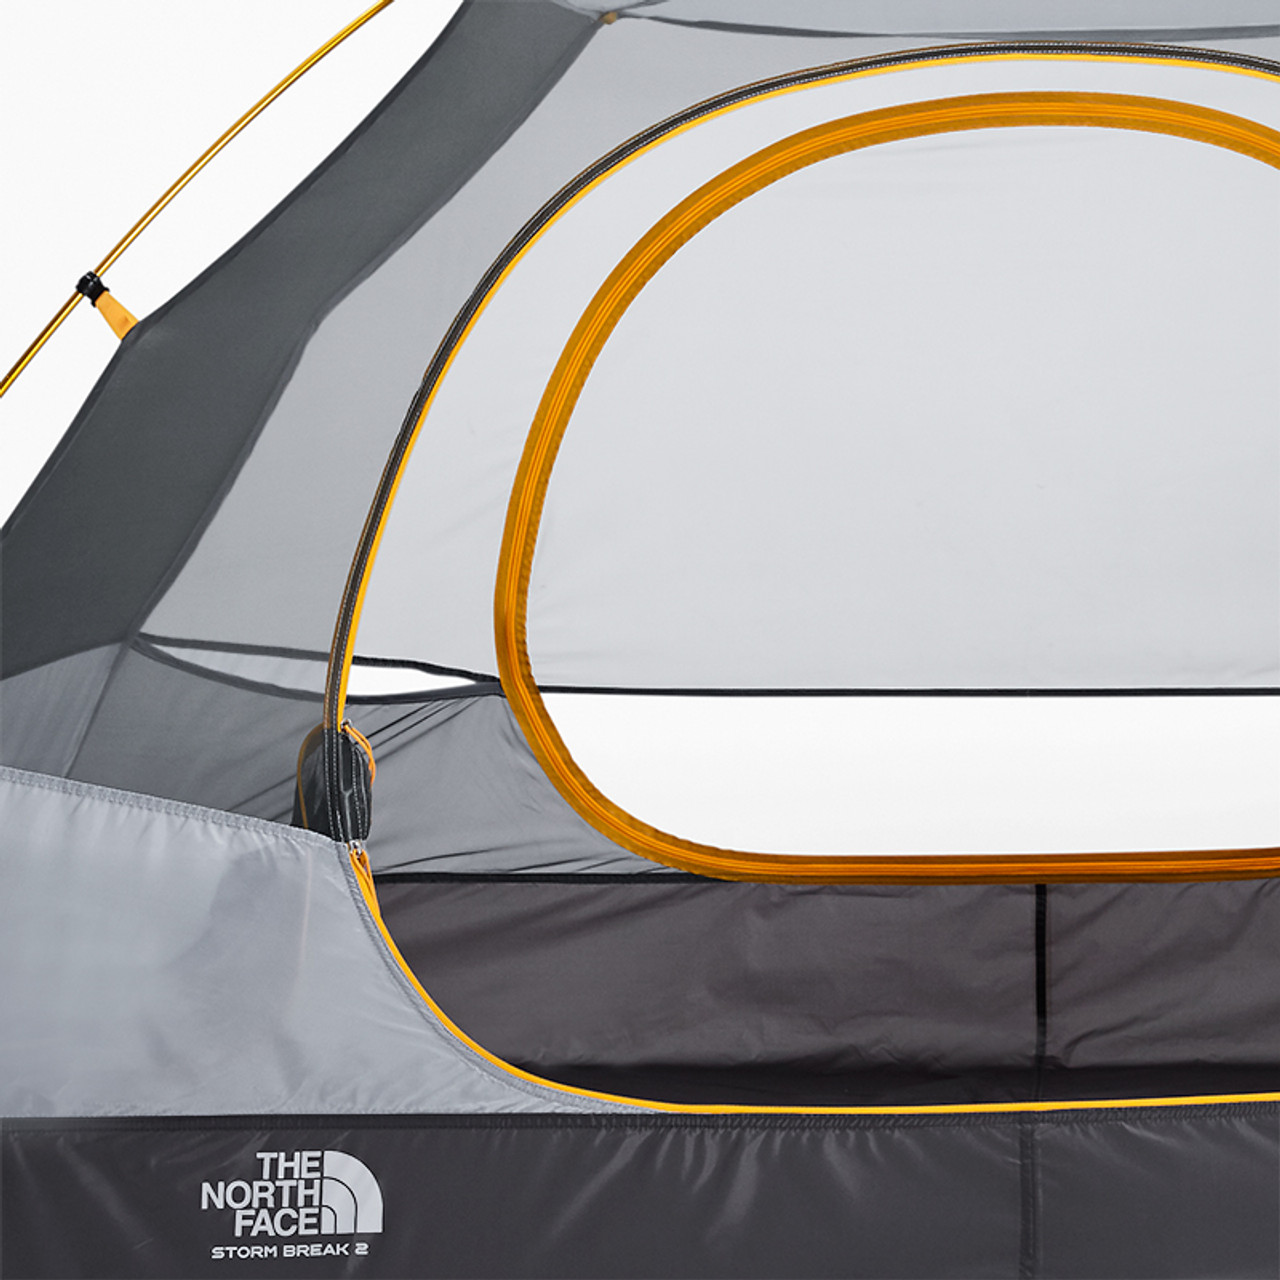 The North Face Stormbreak 2 Person Tent - Alabama Outdoors